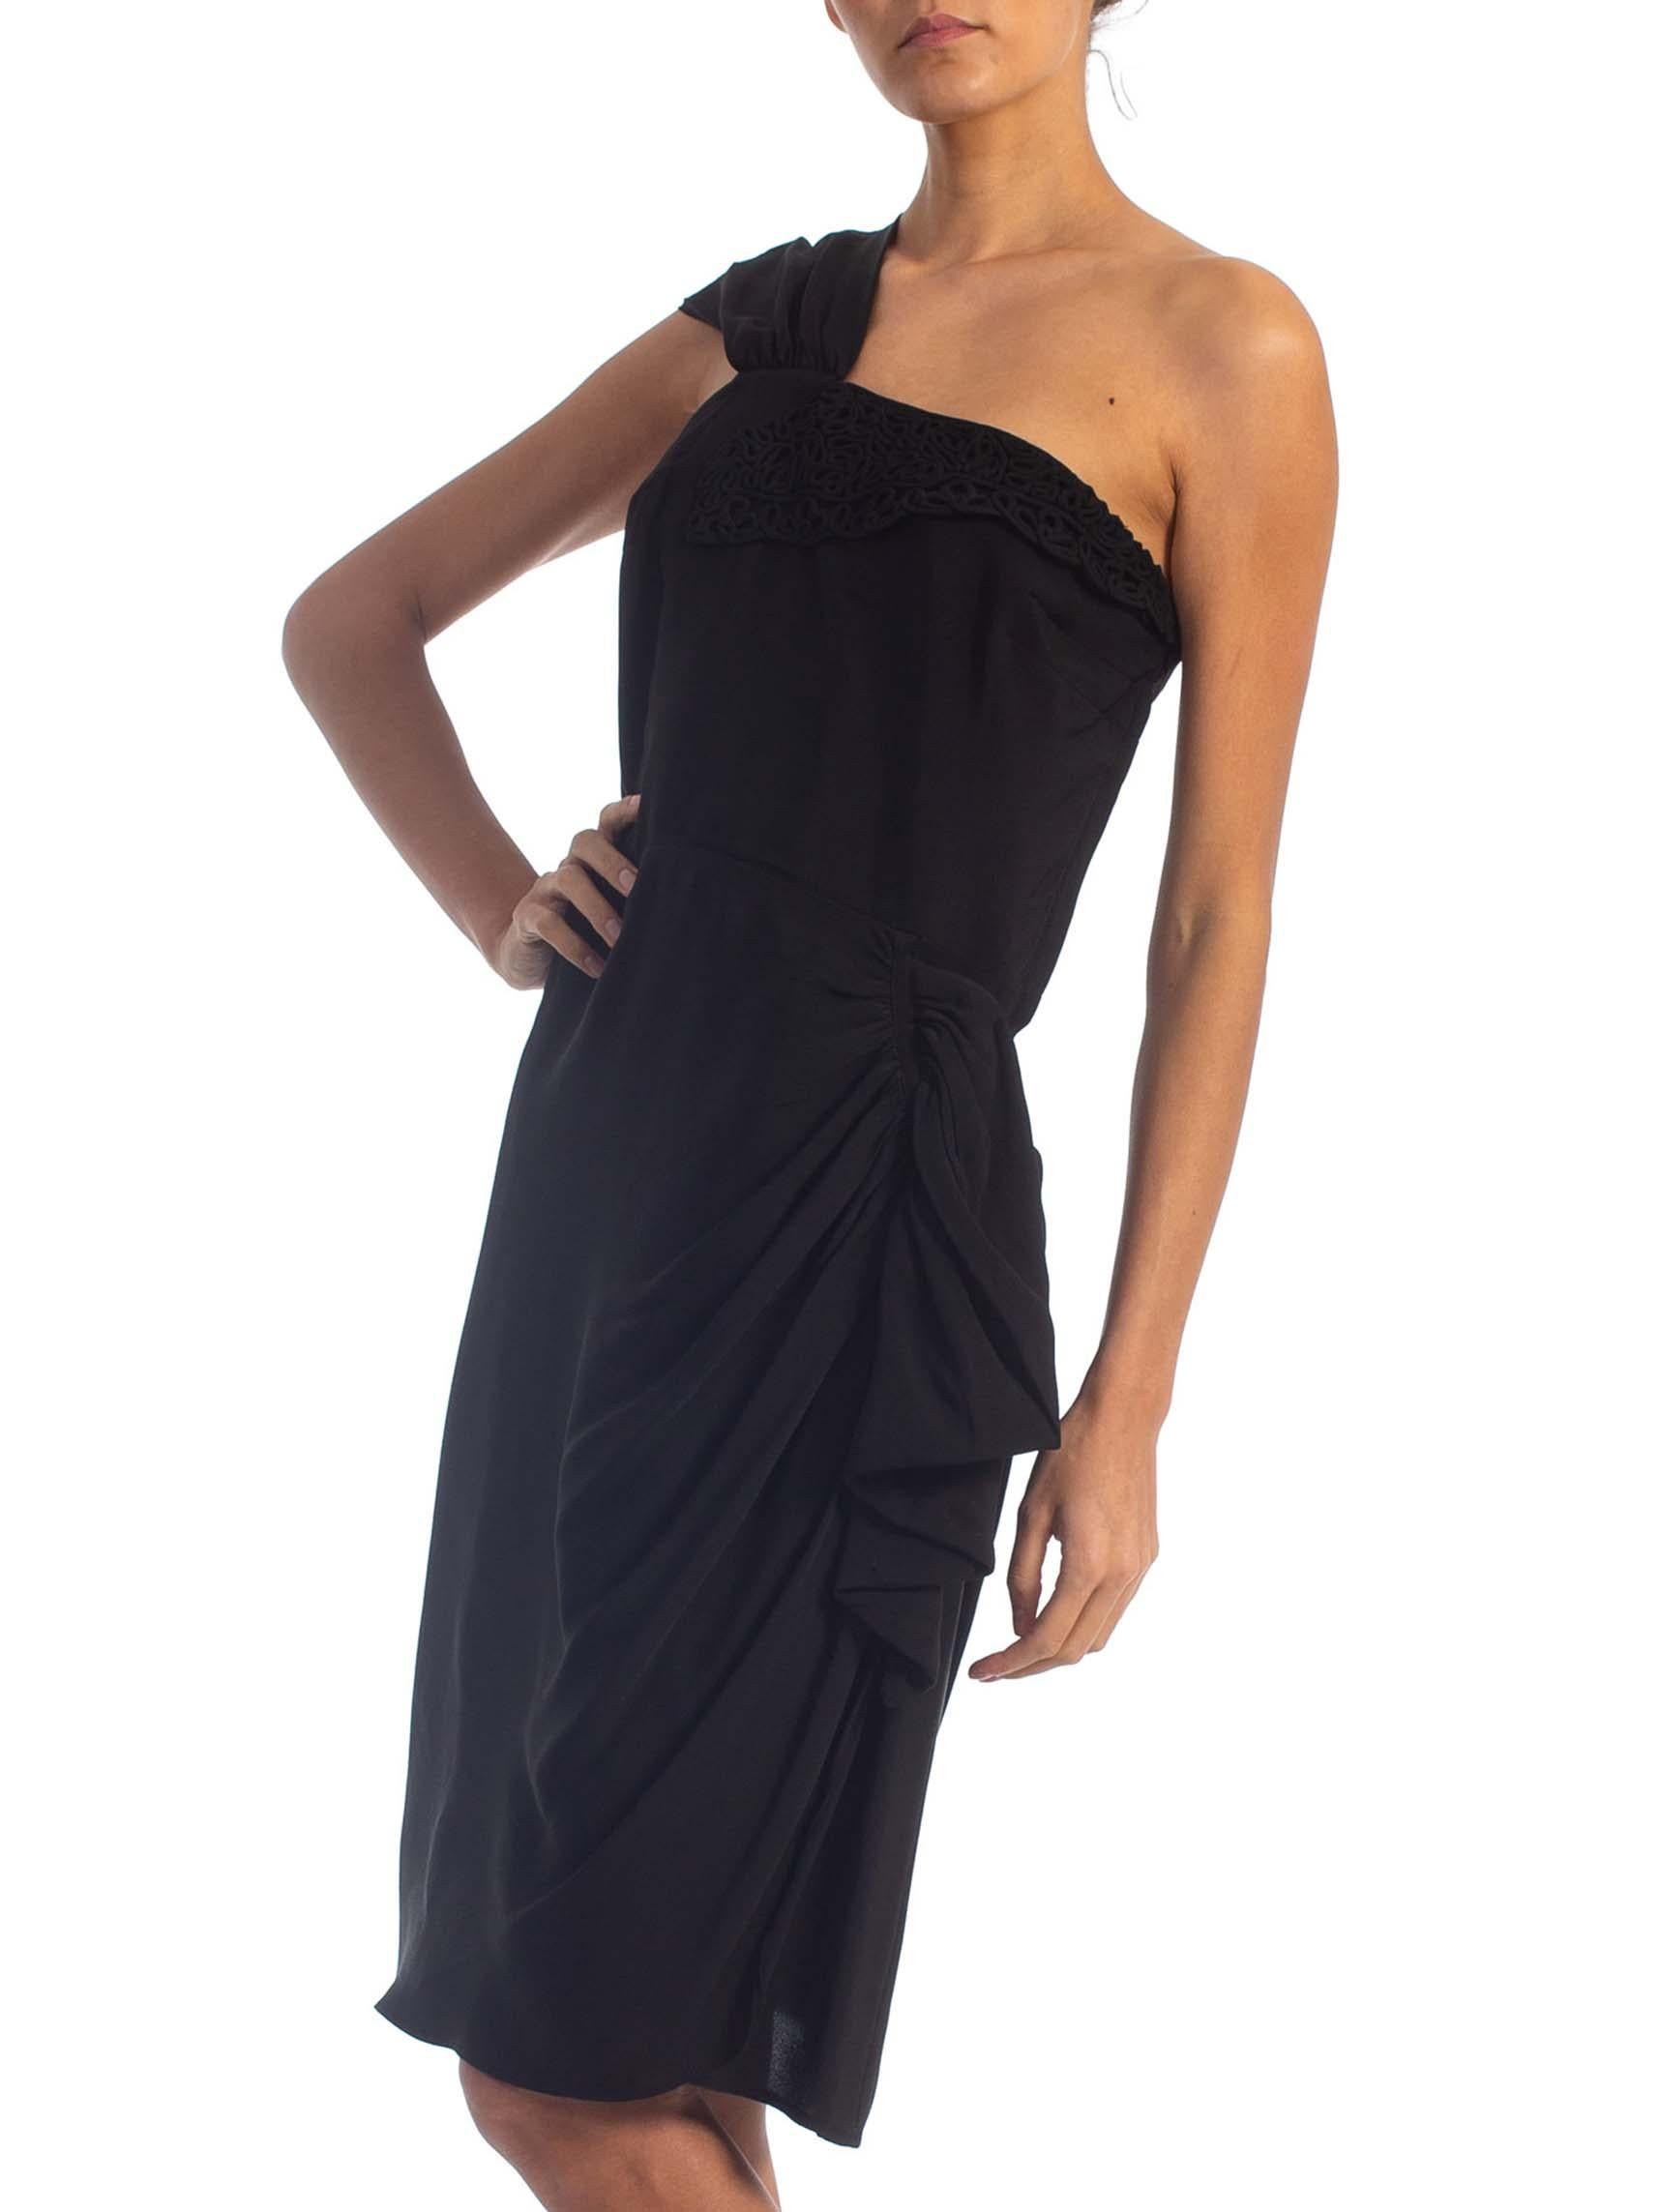 1940'S Black Rayon Crepe One Shoulder Draped Peplum Cocktail Dress For Sale 2